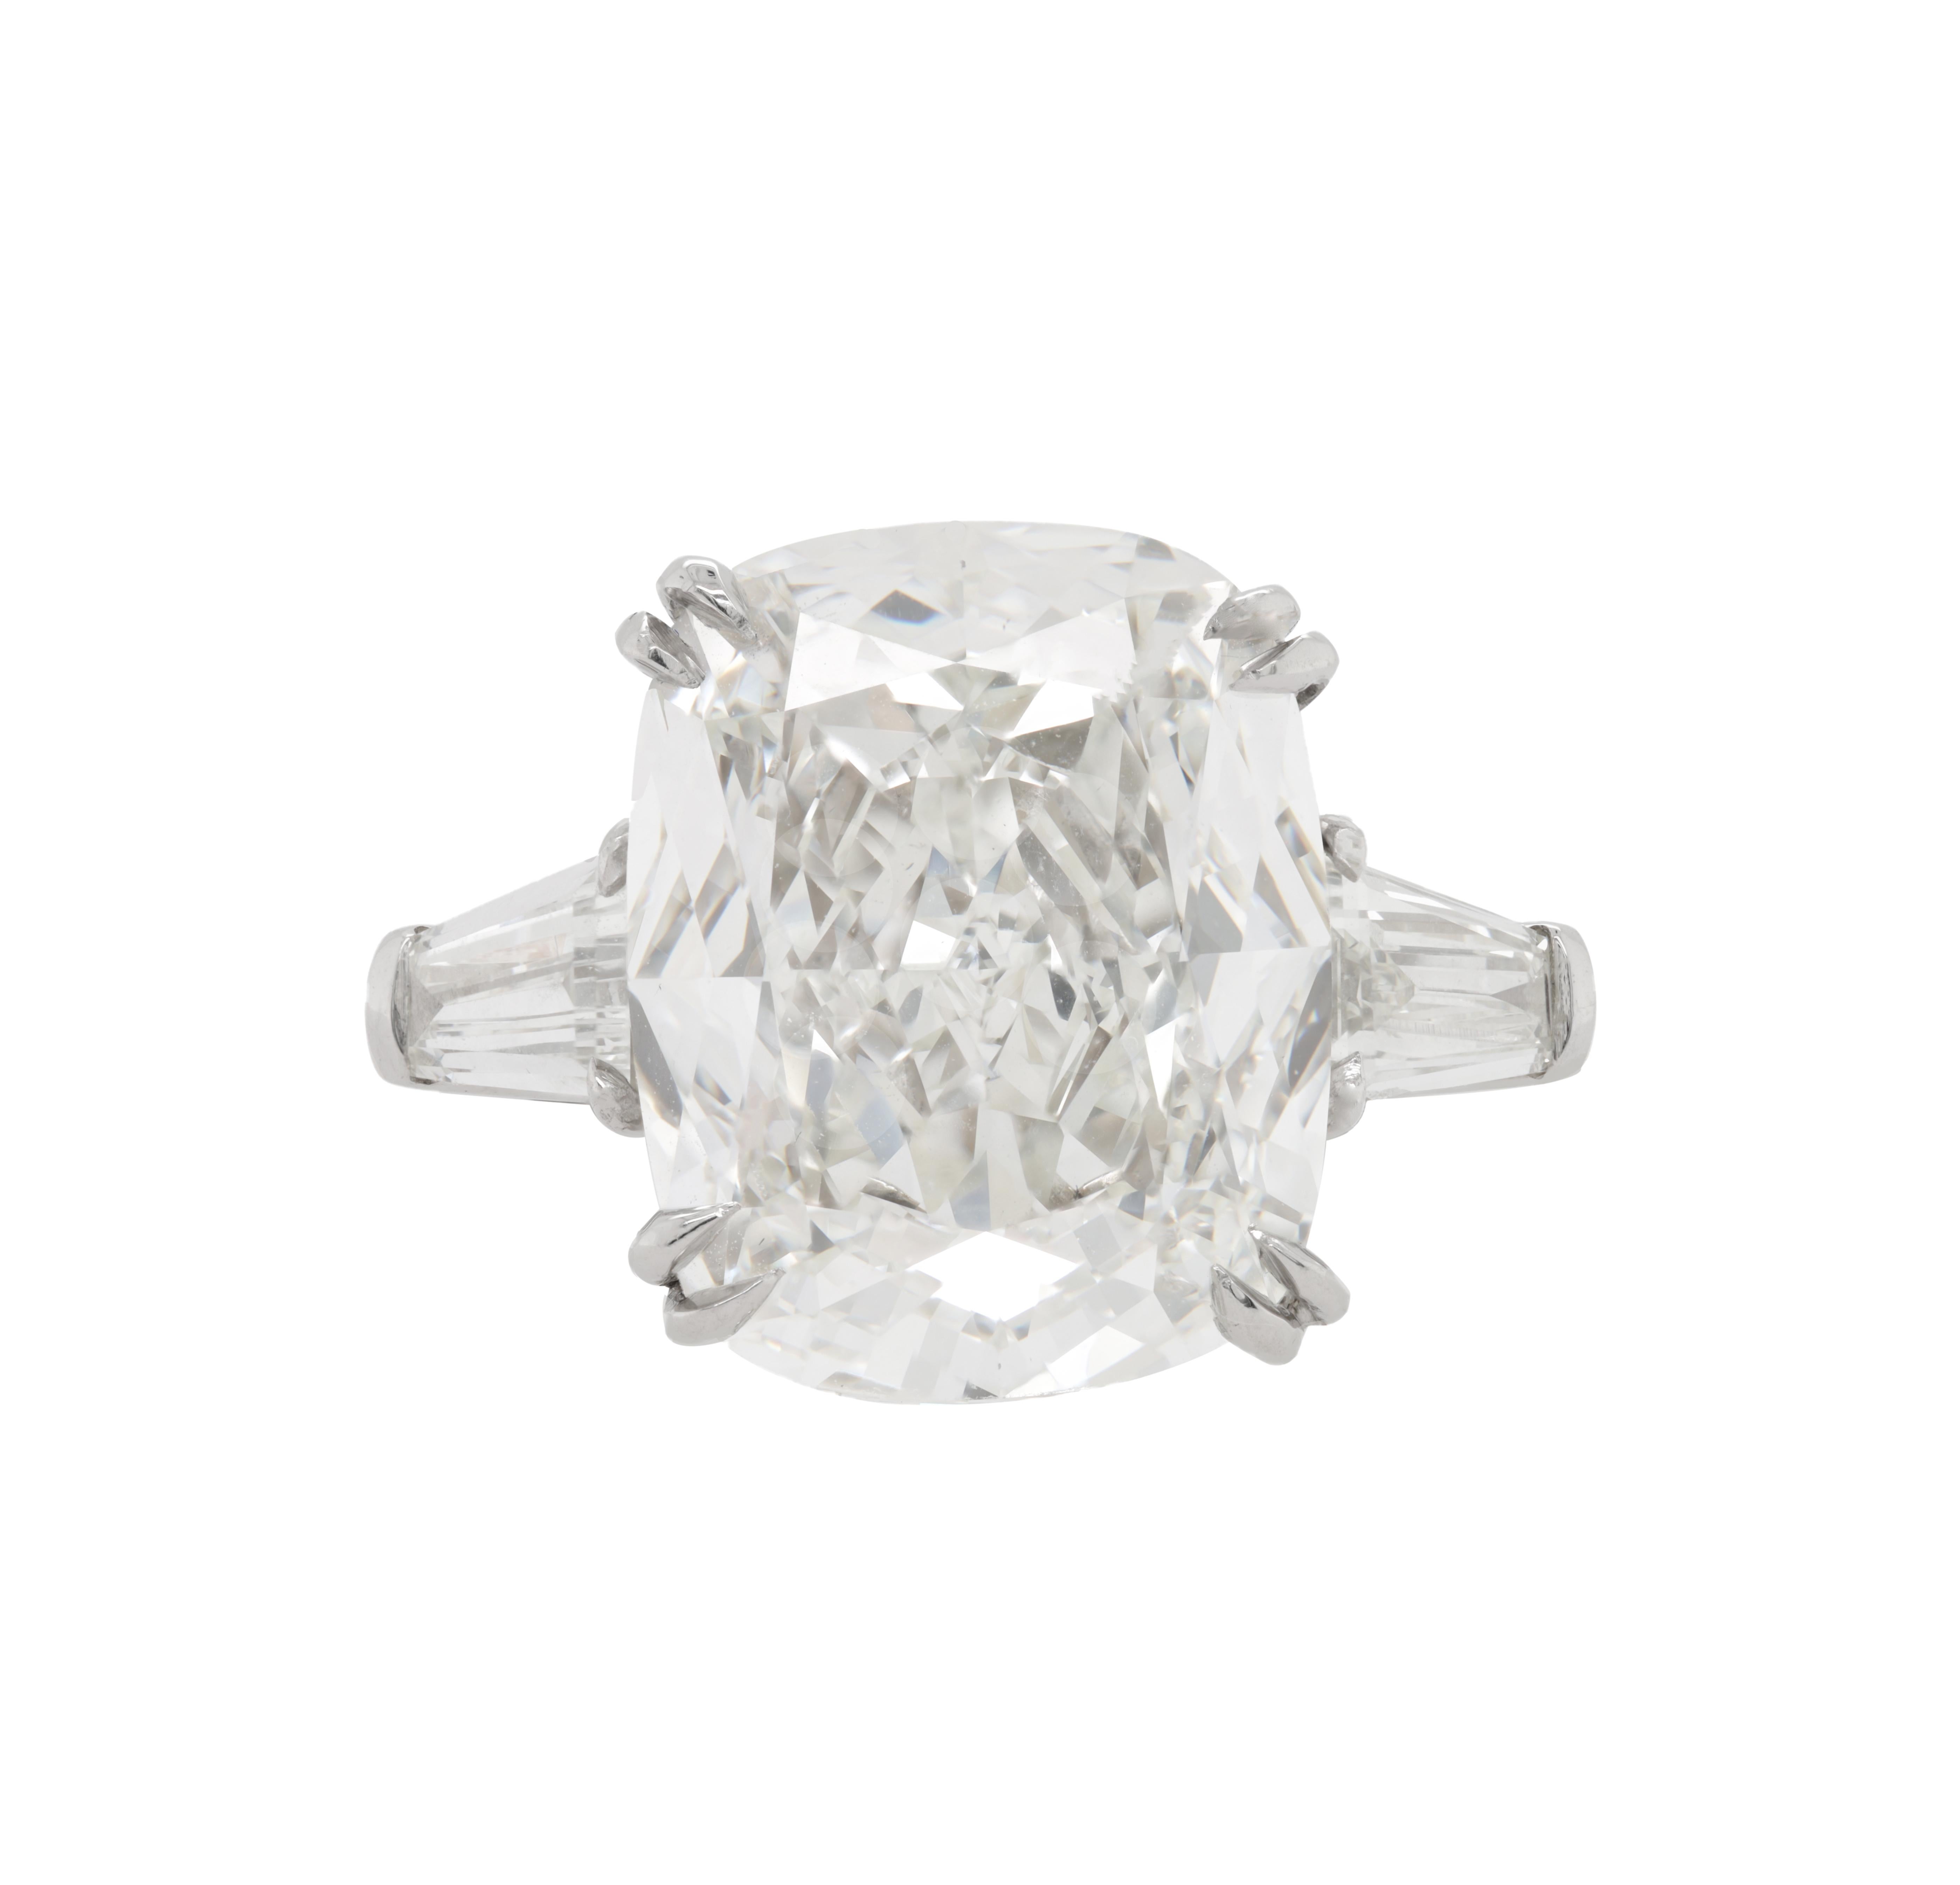 elongated cushion cut with tapered baguettes